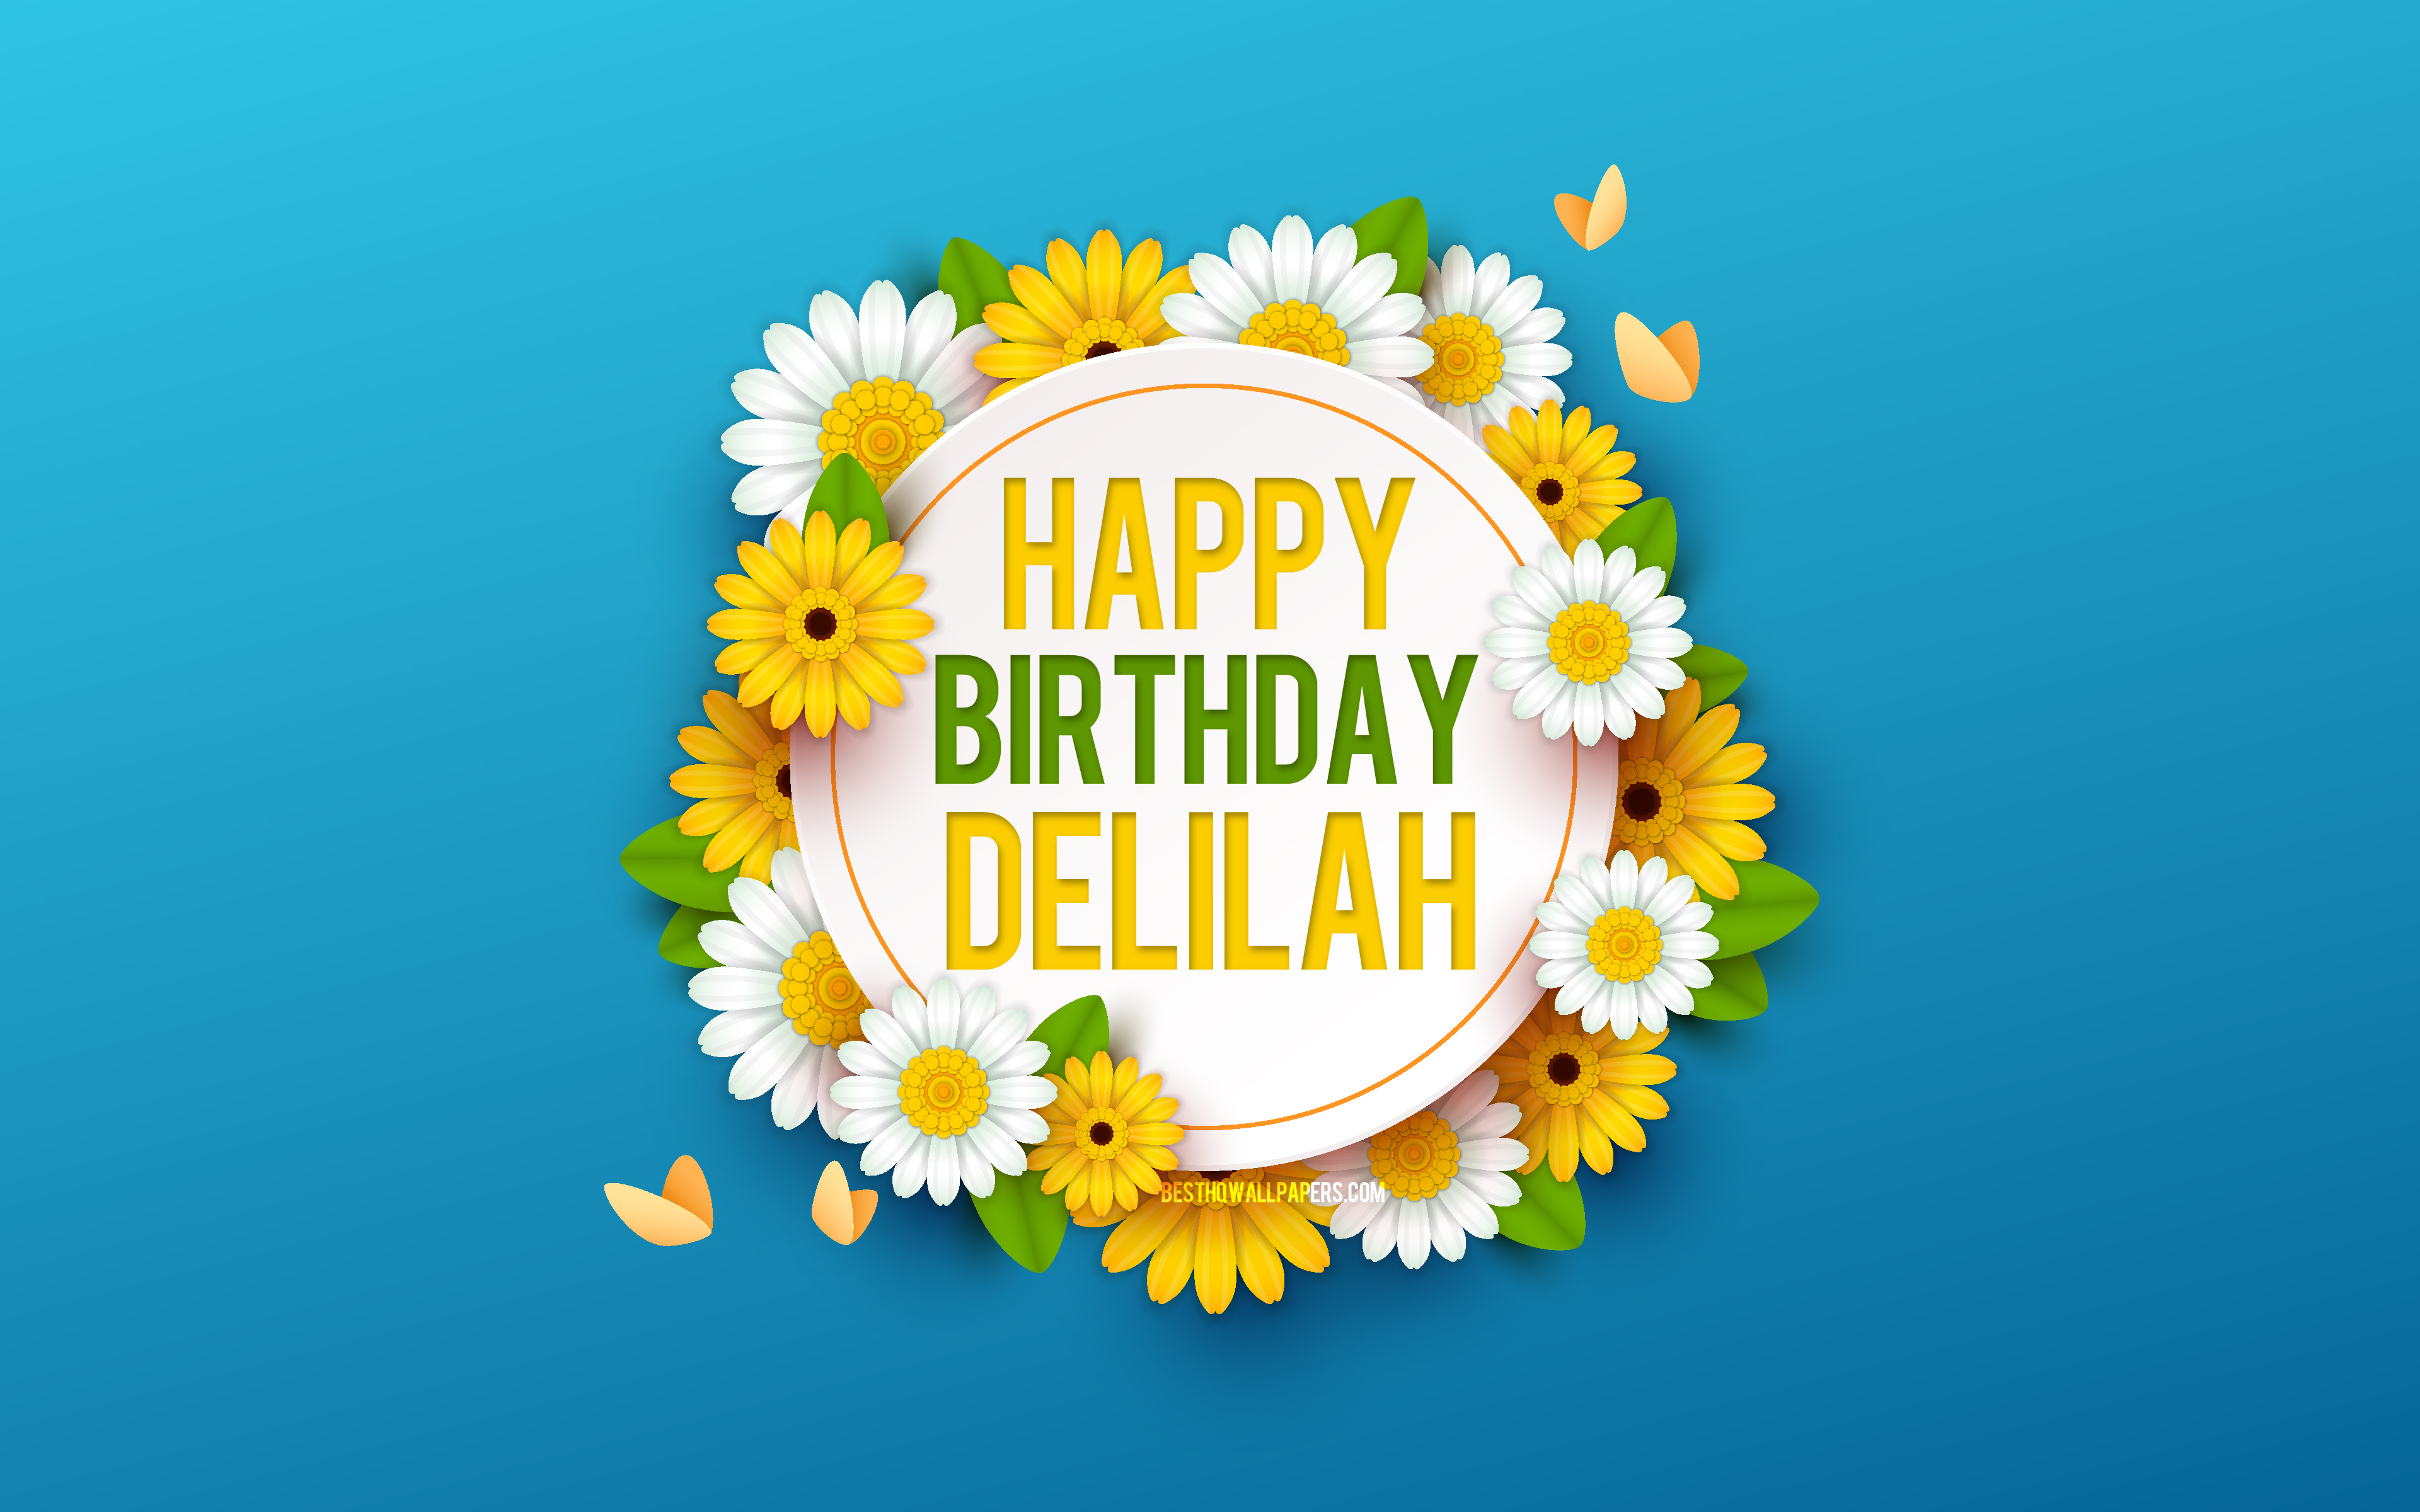 Download Wallpapers Happy Birthday Delilah 4k Blue Background With